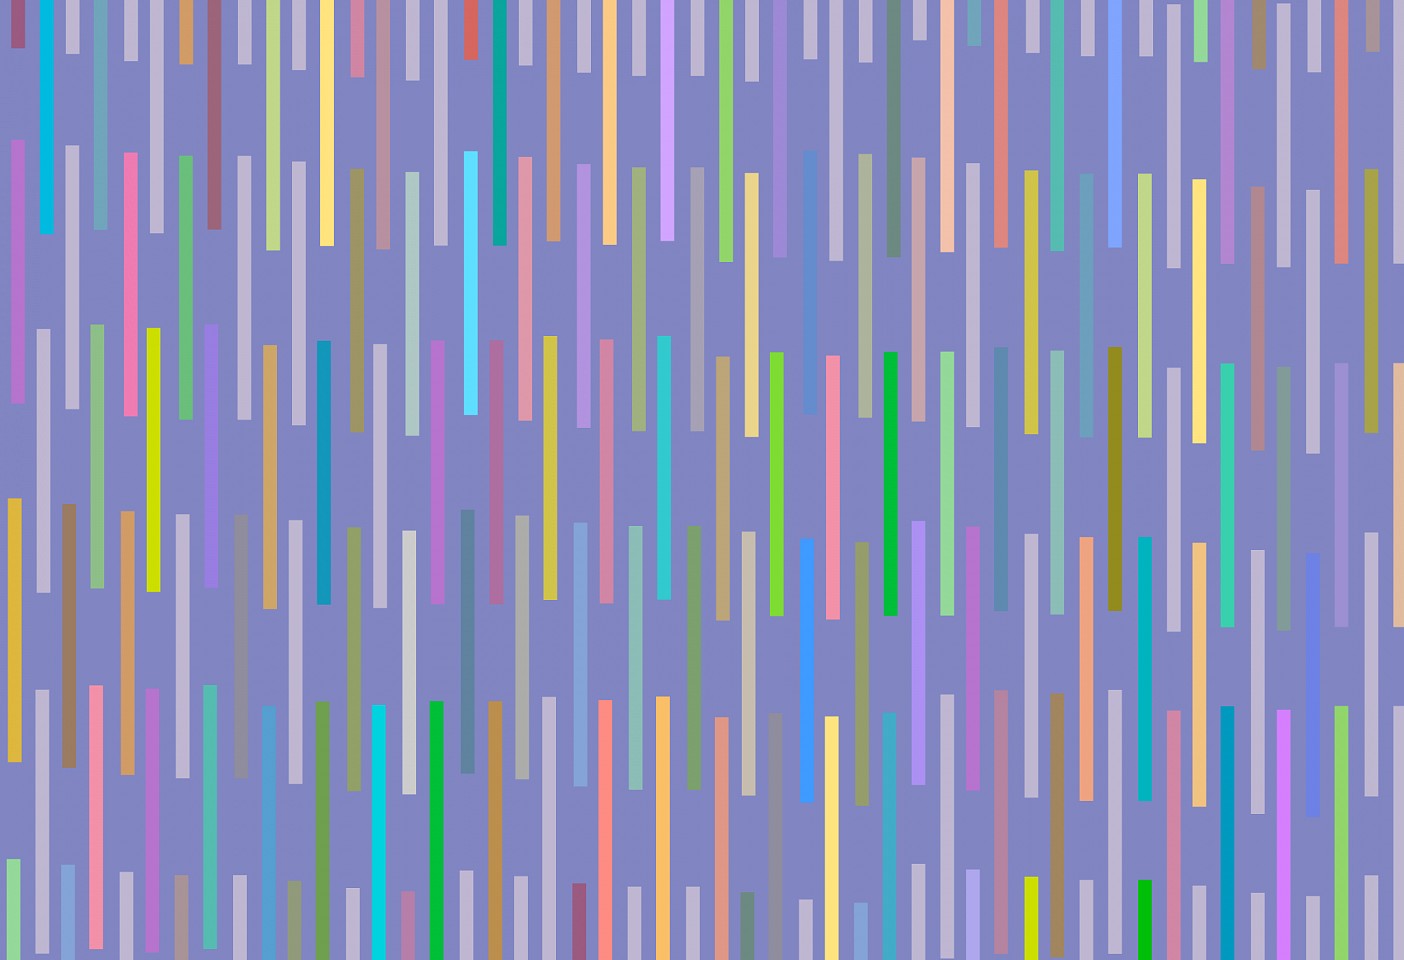 Dane Albert, Color Sticks #41 Night, 2023
Acrylic on canvas (Concept), 48 x 72 in. (121.9 x 182.9 cm)
Series of colored lines and shapes in multiple configurations
DA.2023.sticks-041-night